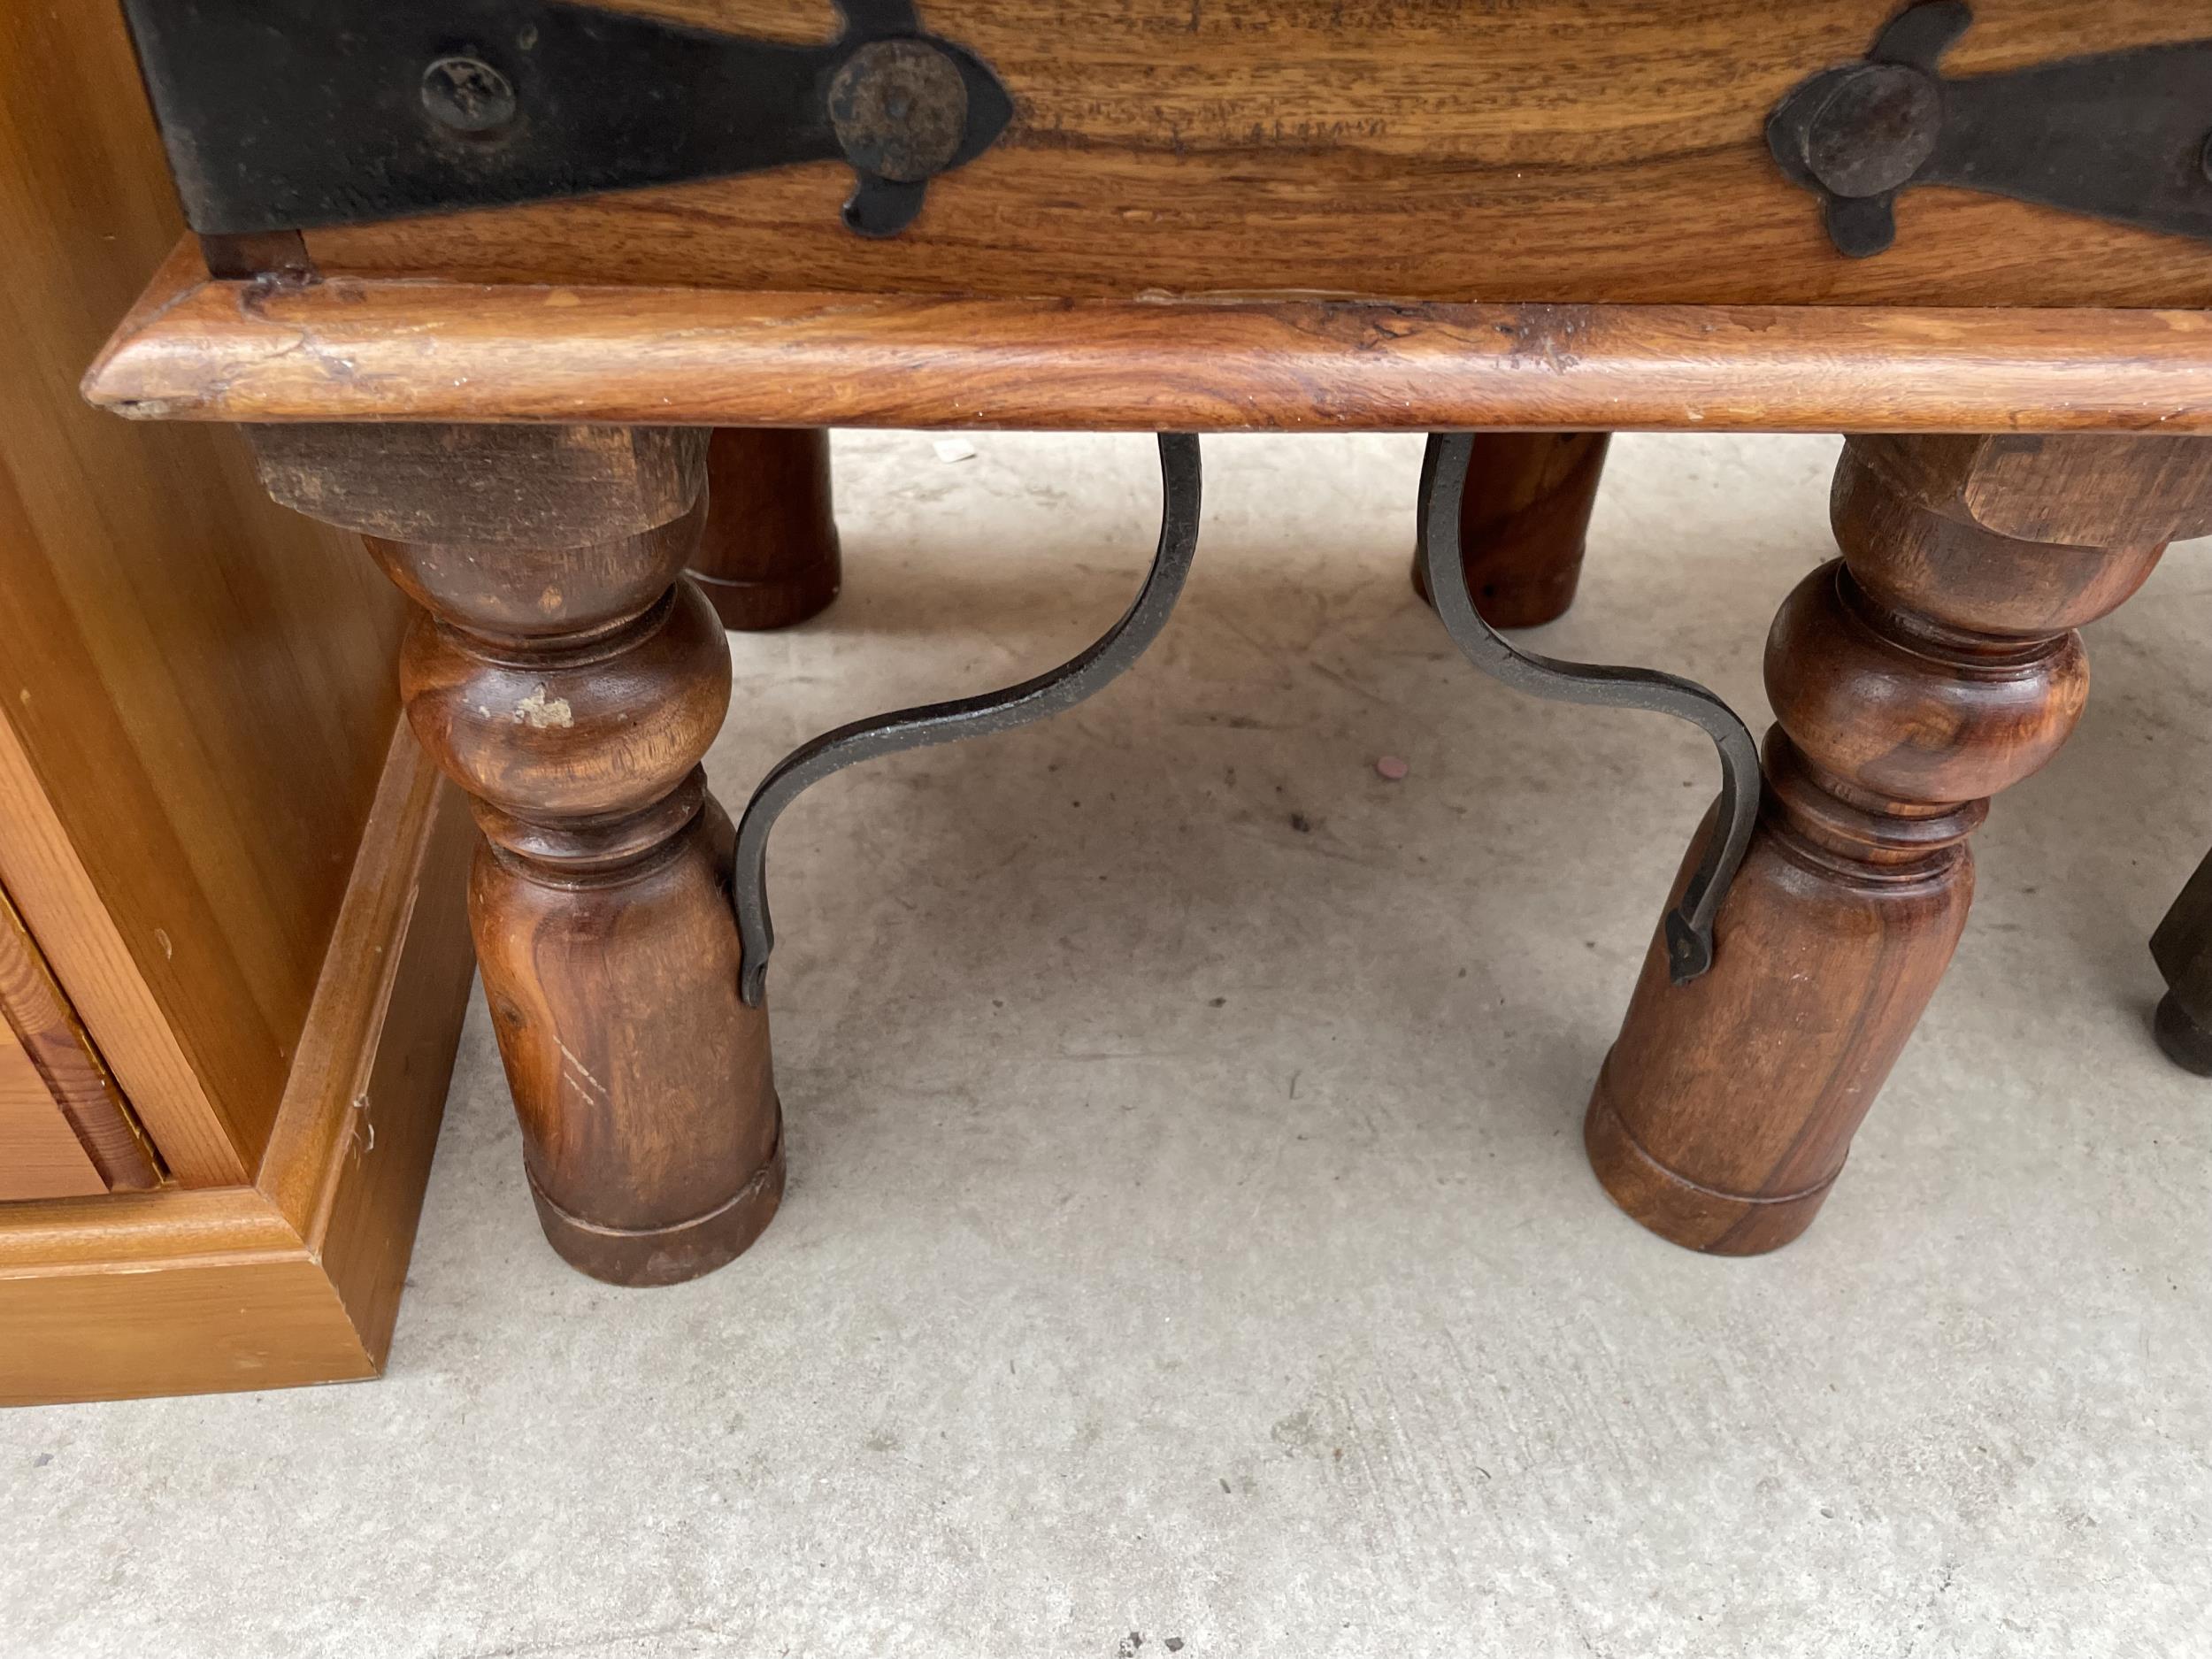 A MODERN INDIAN HARDWOOD LAMP TABLE WITH IRON WORK STUDS AND SUPPORTS, 18" SQUARE - Image 3 of 3